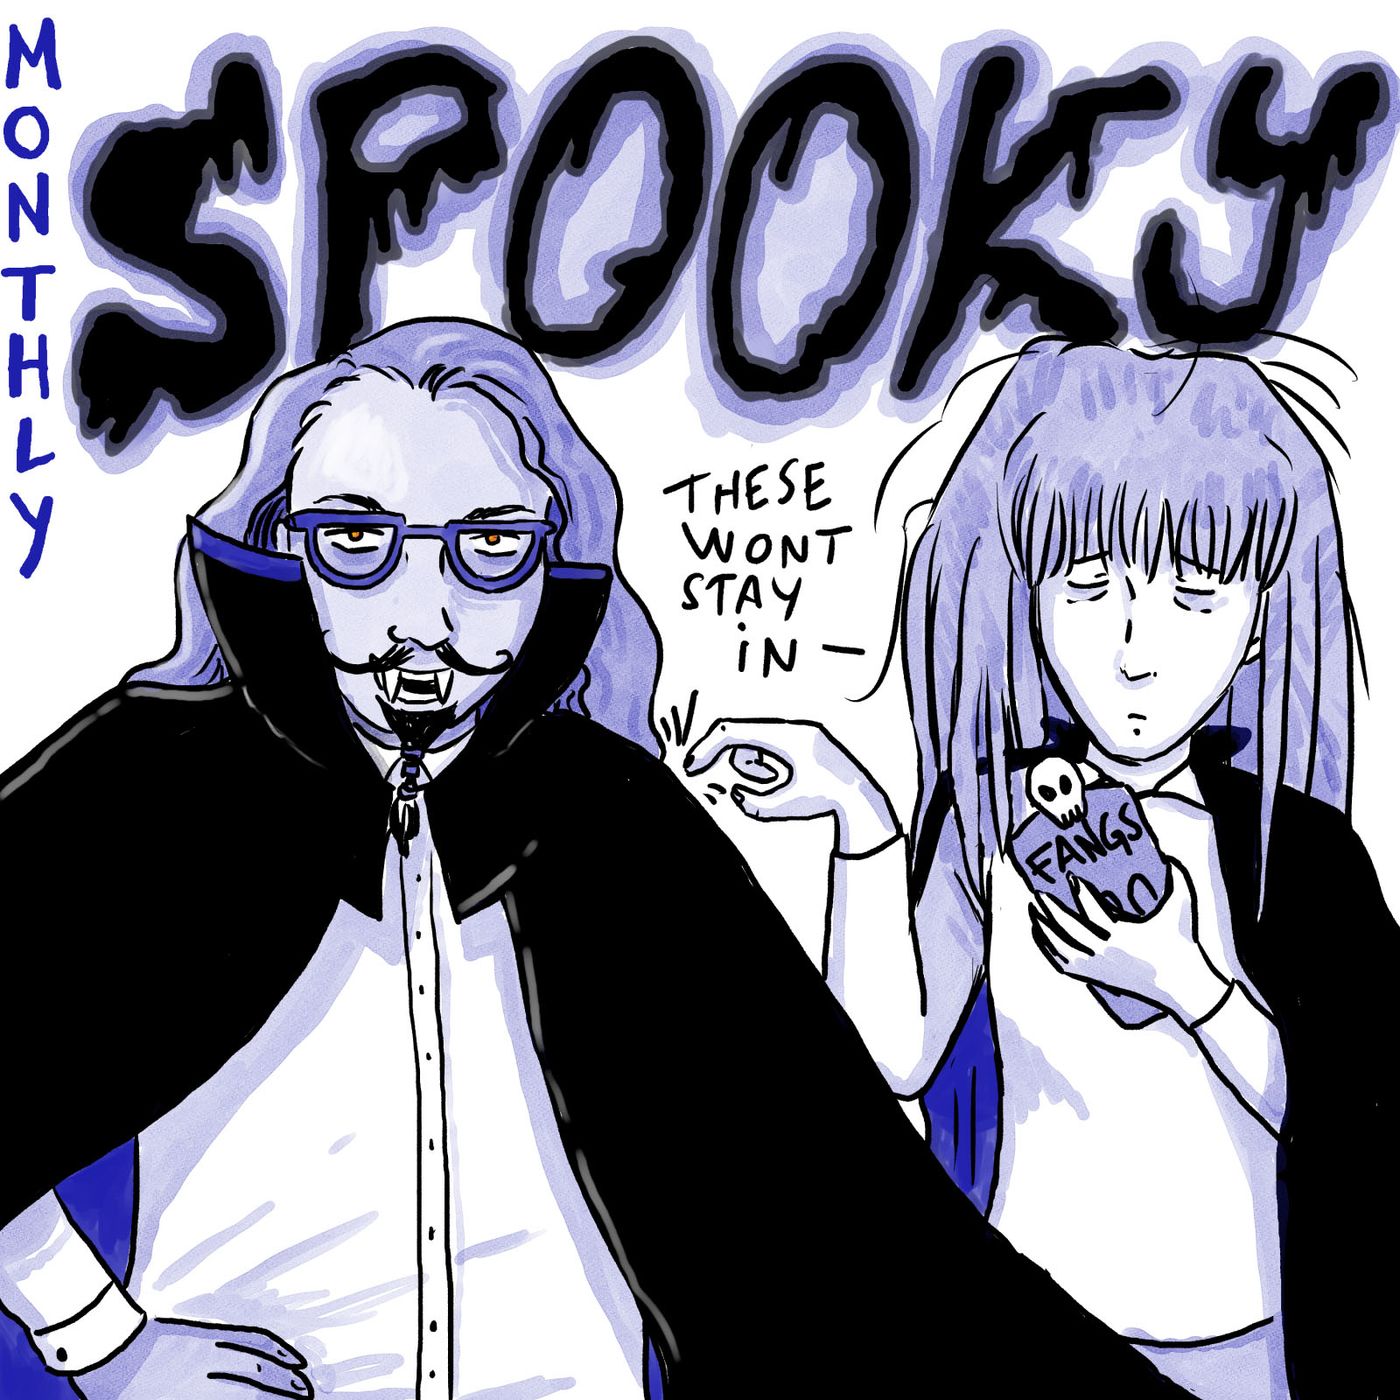 Monthly Spooky | Witch's Tower, Bigfoot on the Loose and Halloween Tips with Crepe! Image